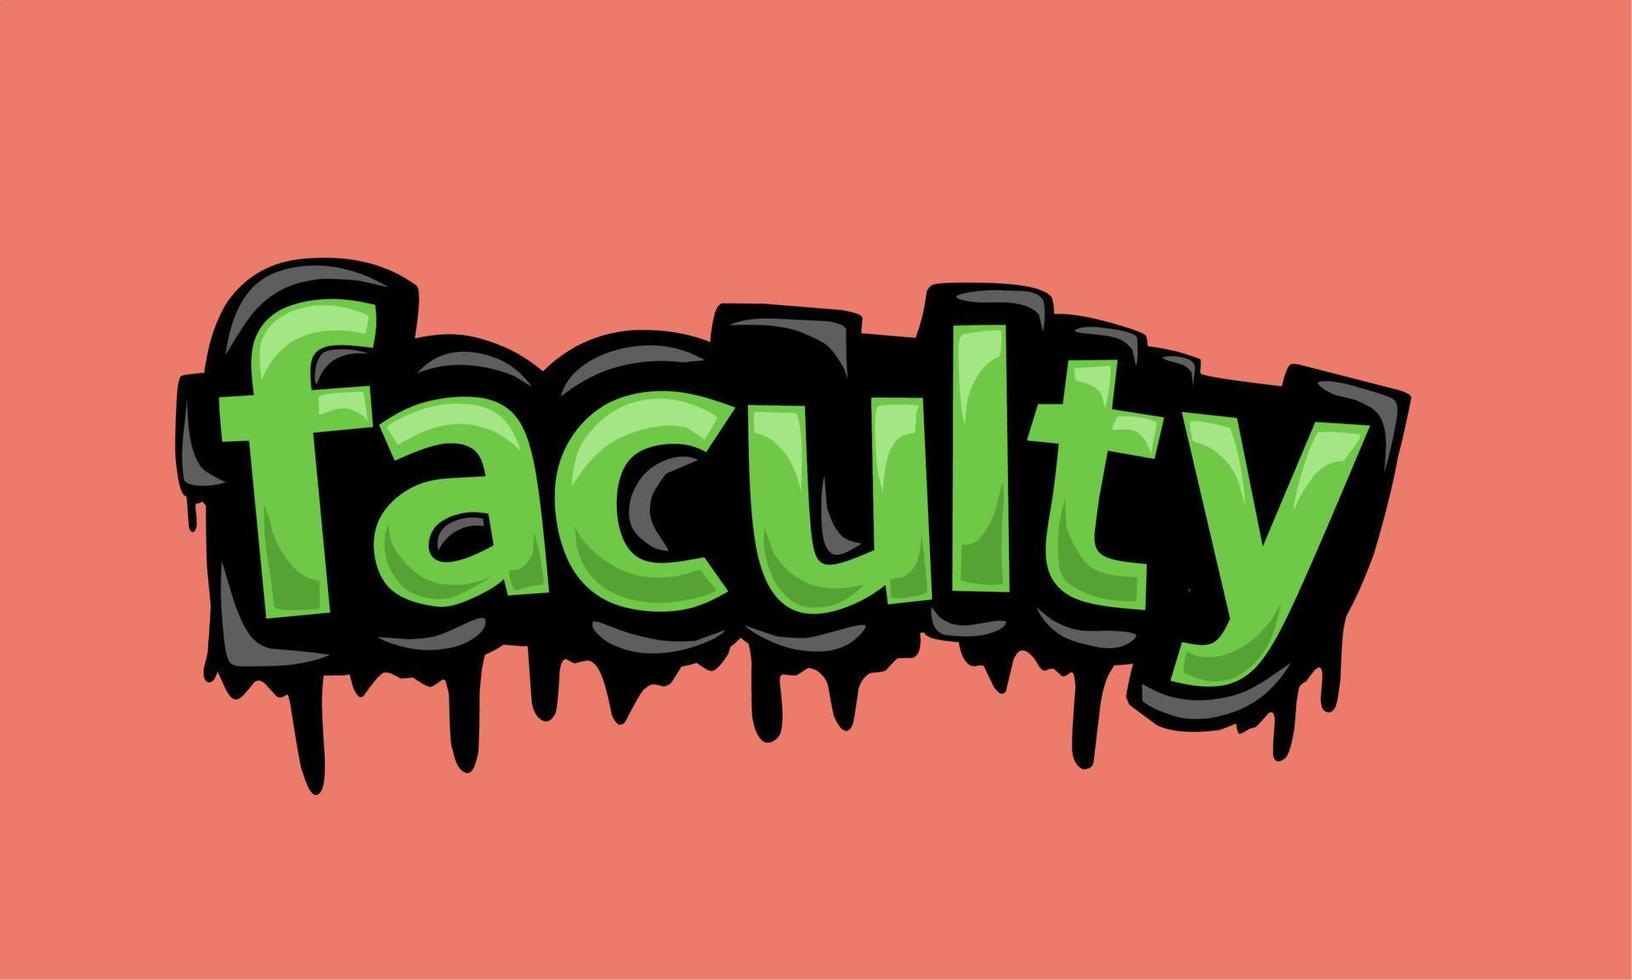 FACULTY writing vector design on pink background